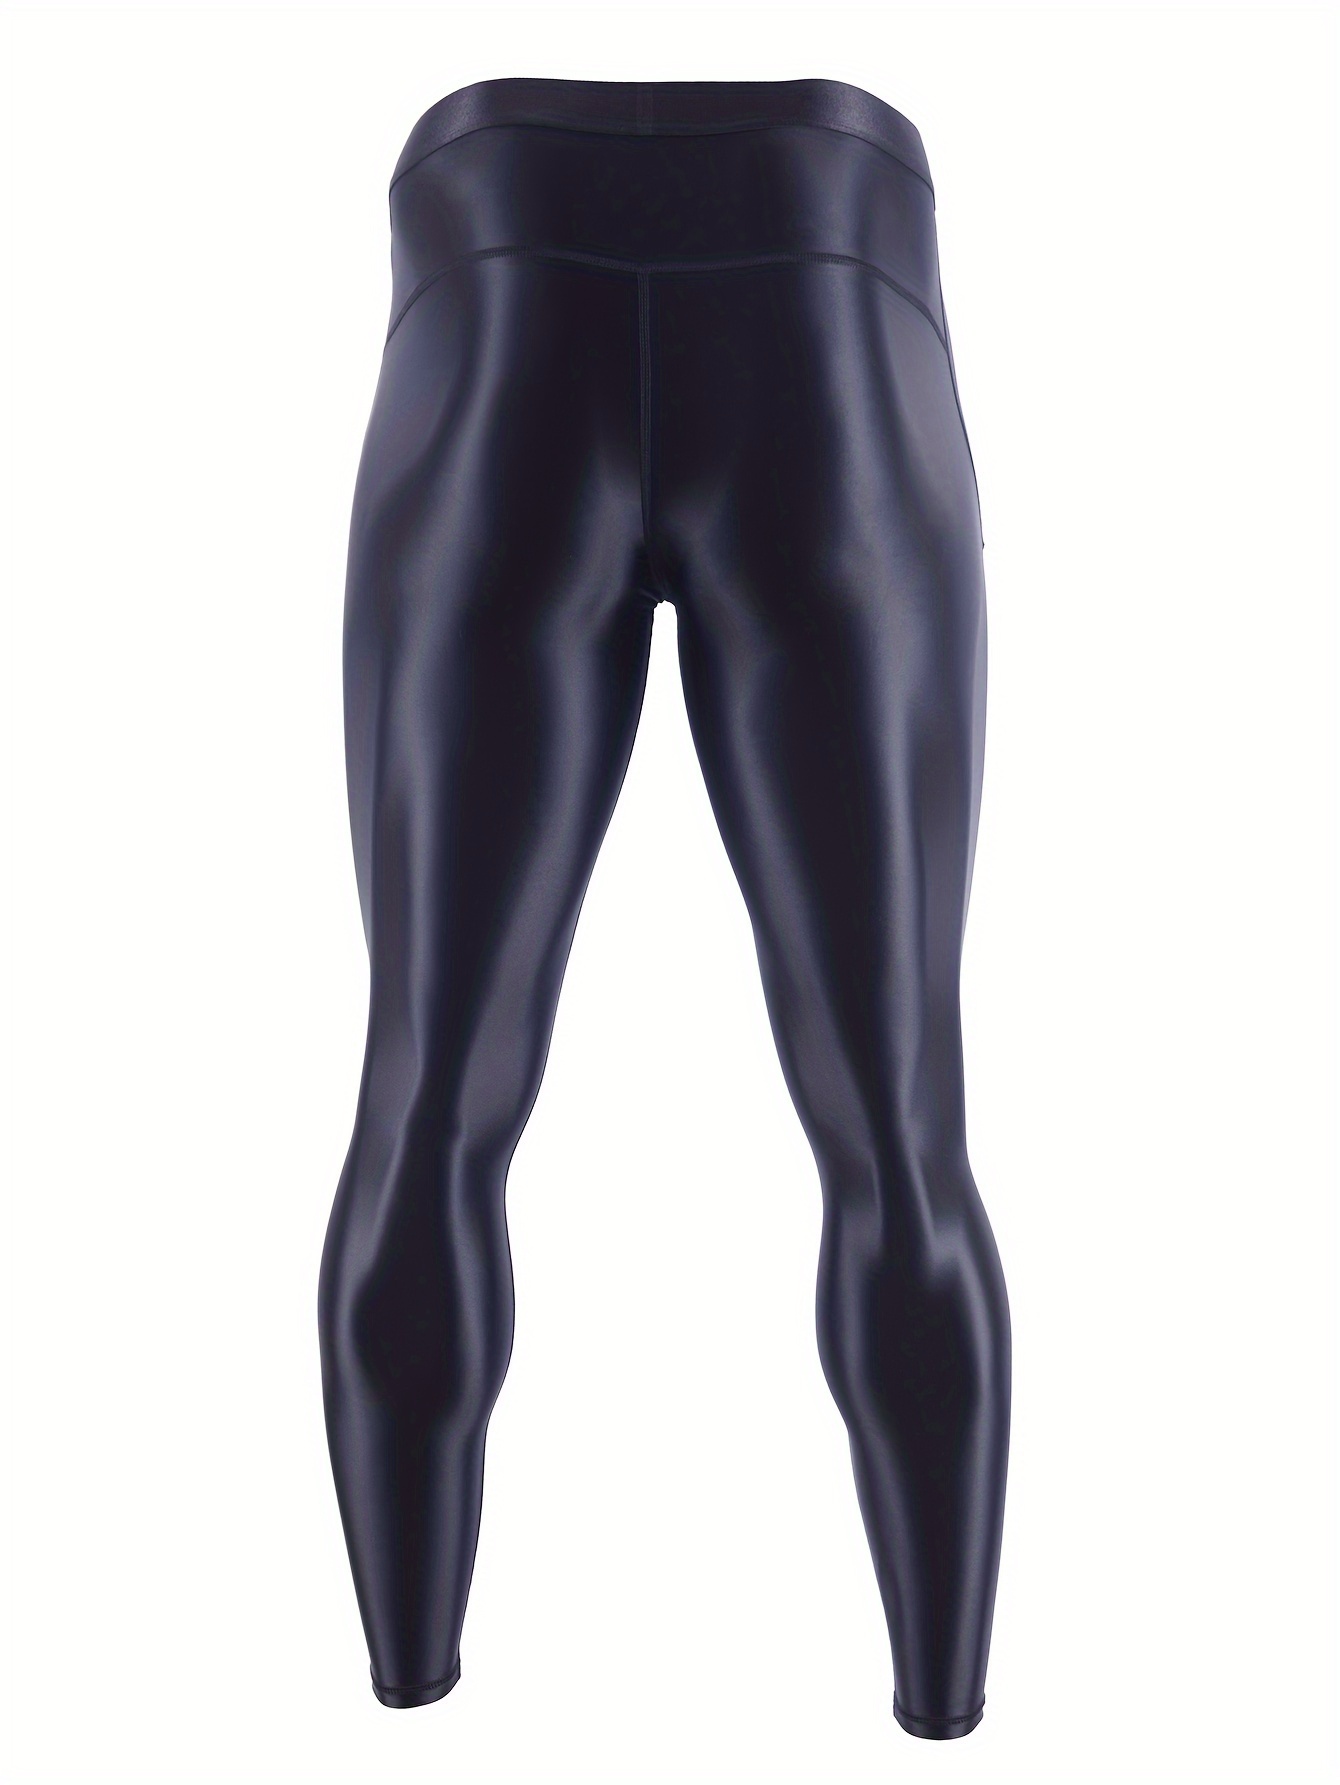 Men's Glossy Smooth Compression Pants Sports Workout Running